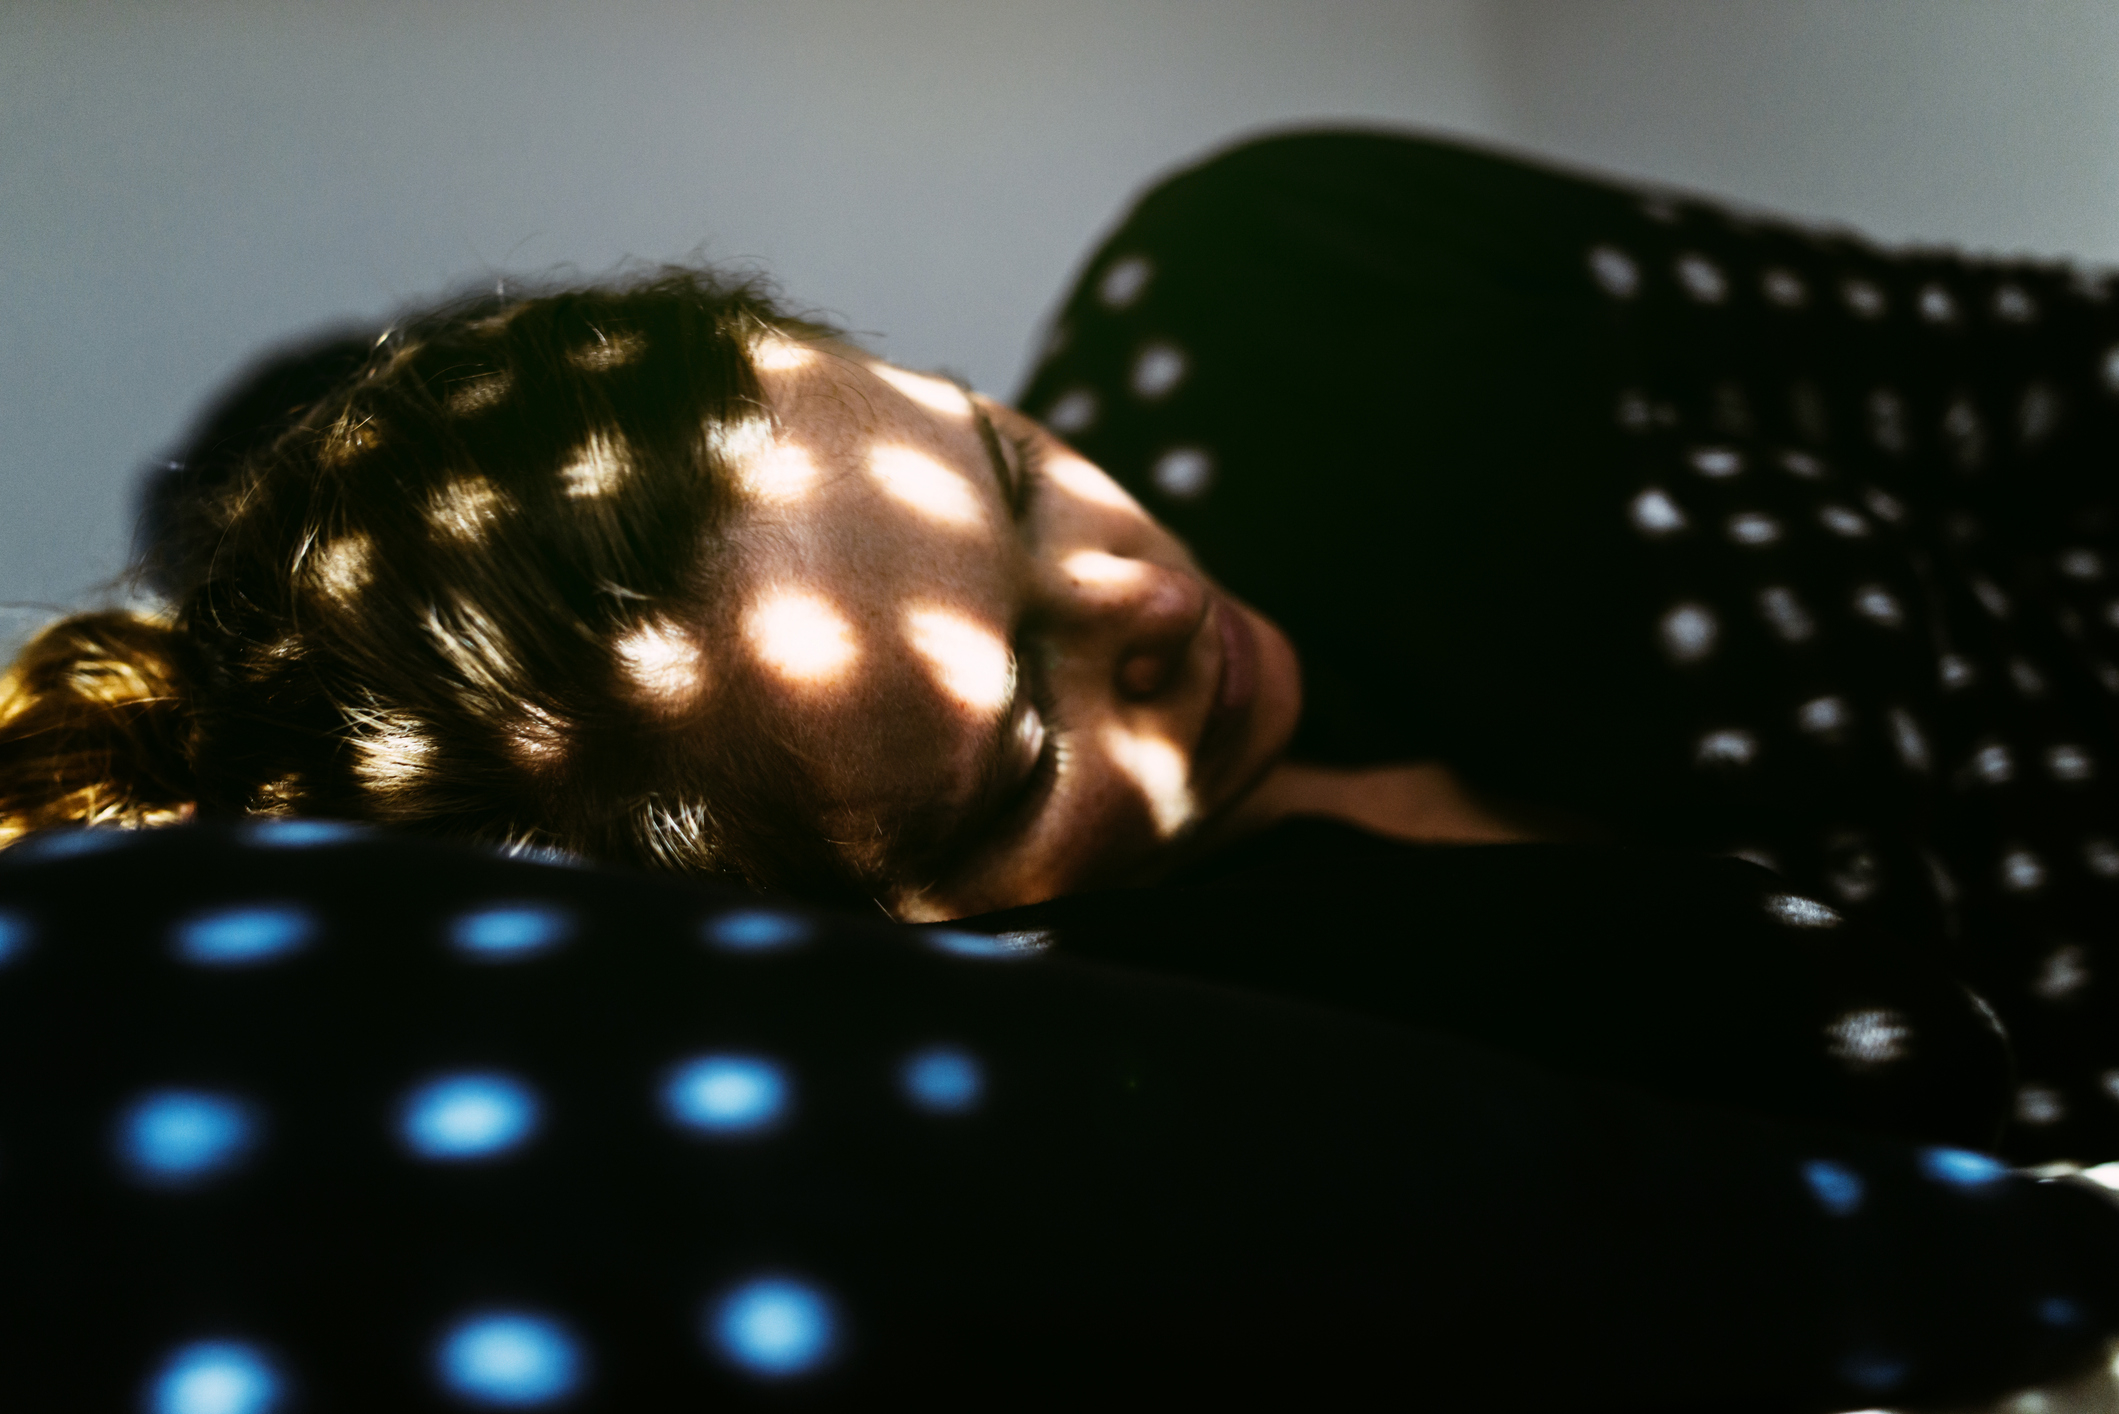 Person resting with dotted light patterns on their face and body, resembling a peaceful atmosphere